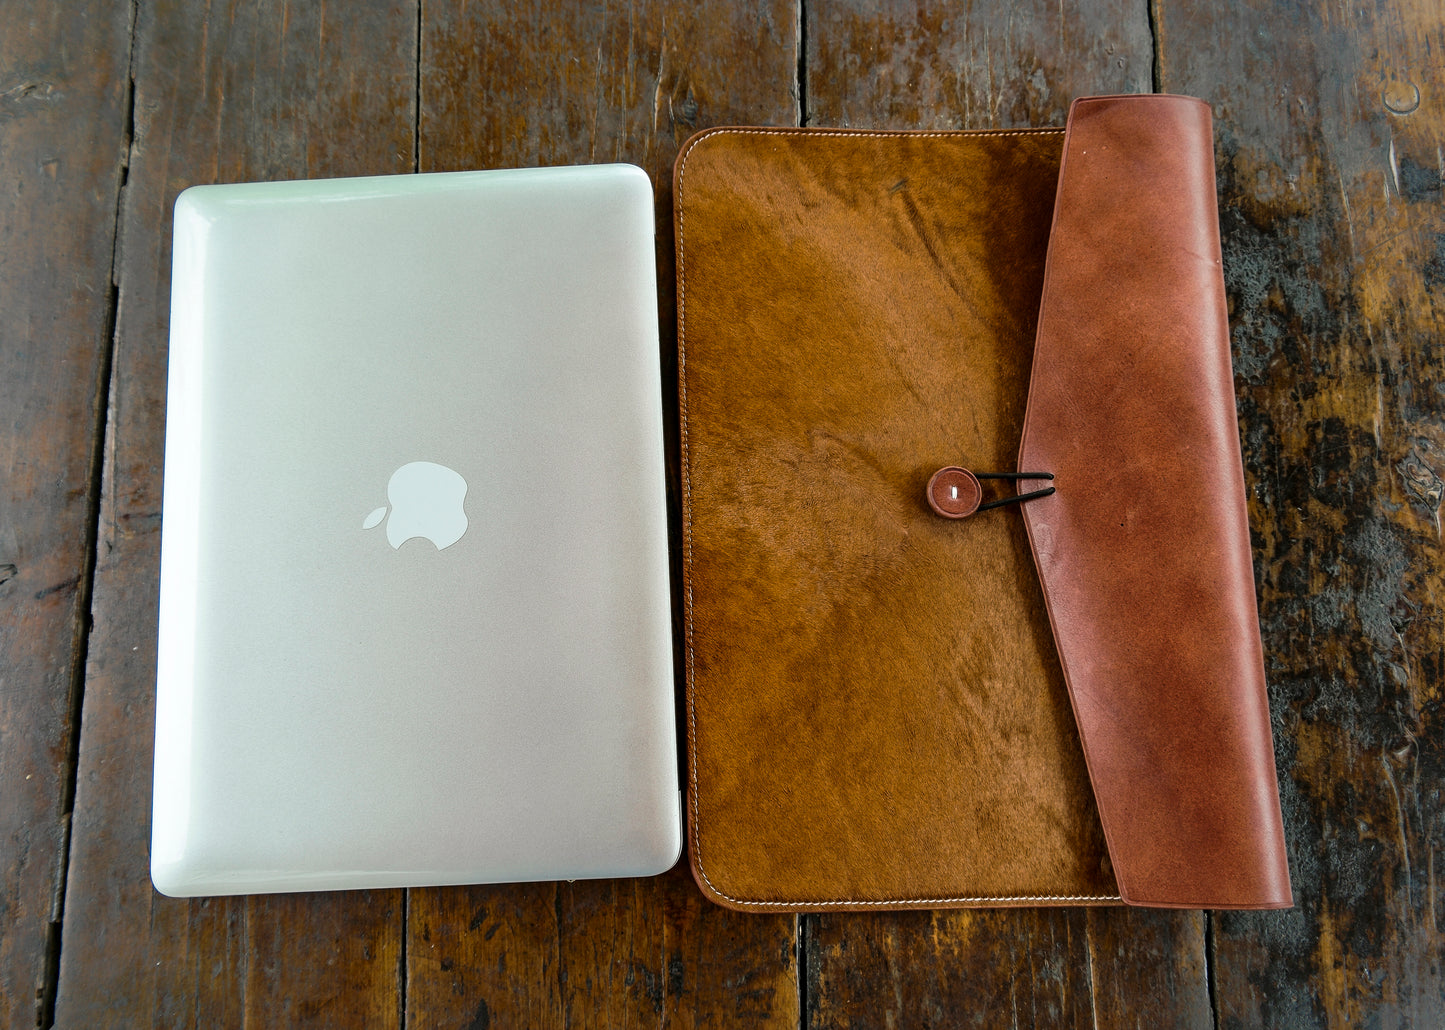 Laptop leather case made of horsehide-Leather Laptop Carrying Cases & Sleeves Leather laptop bag leather laptop cover Laptop Case 13/14 / 15/16/17/17.5 inch case/sleeve, leather laptop cover